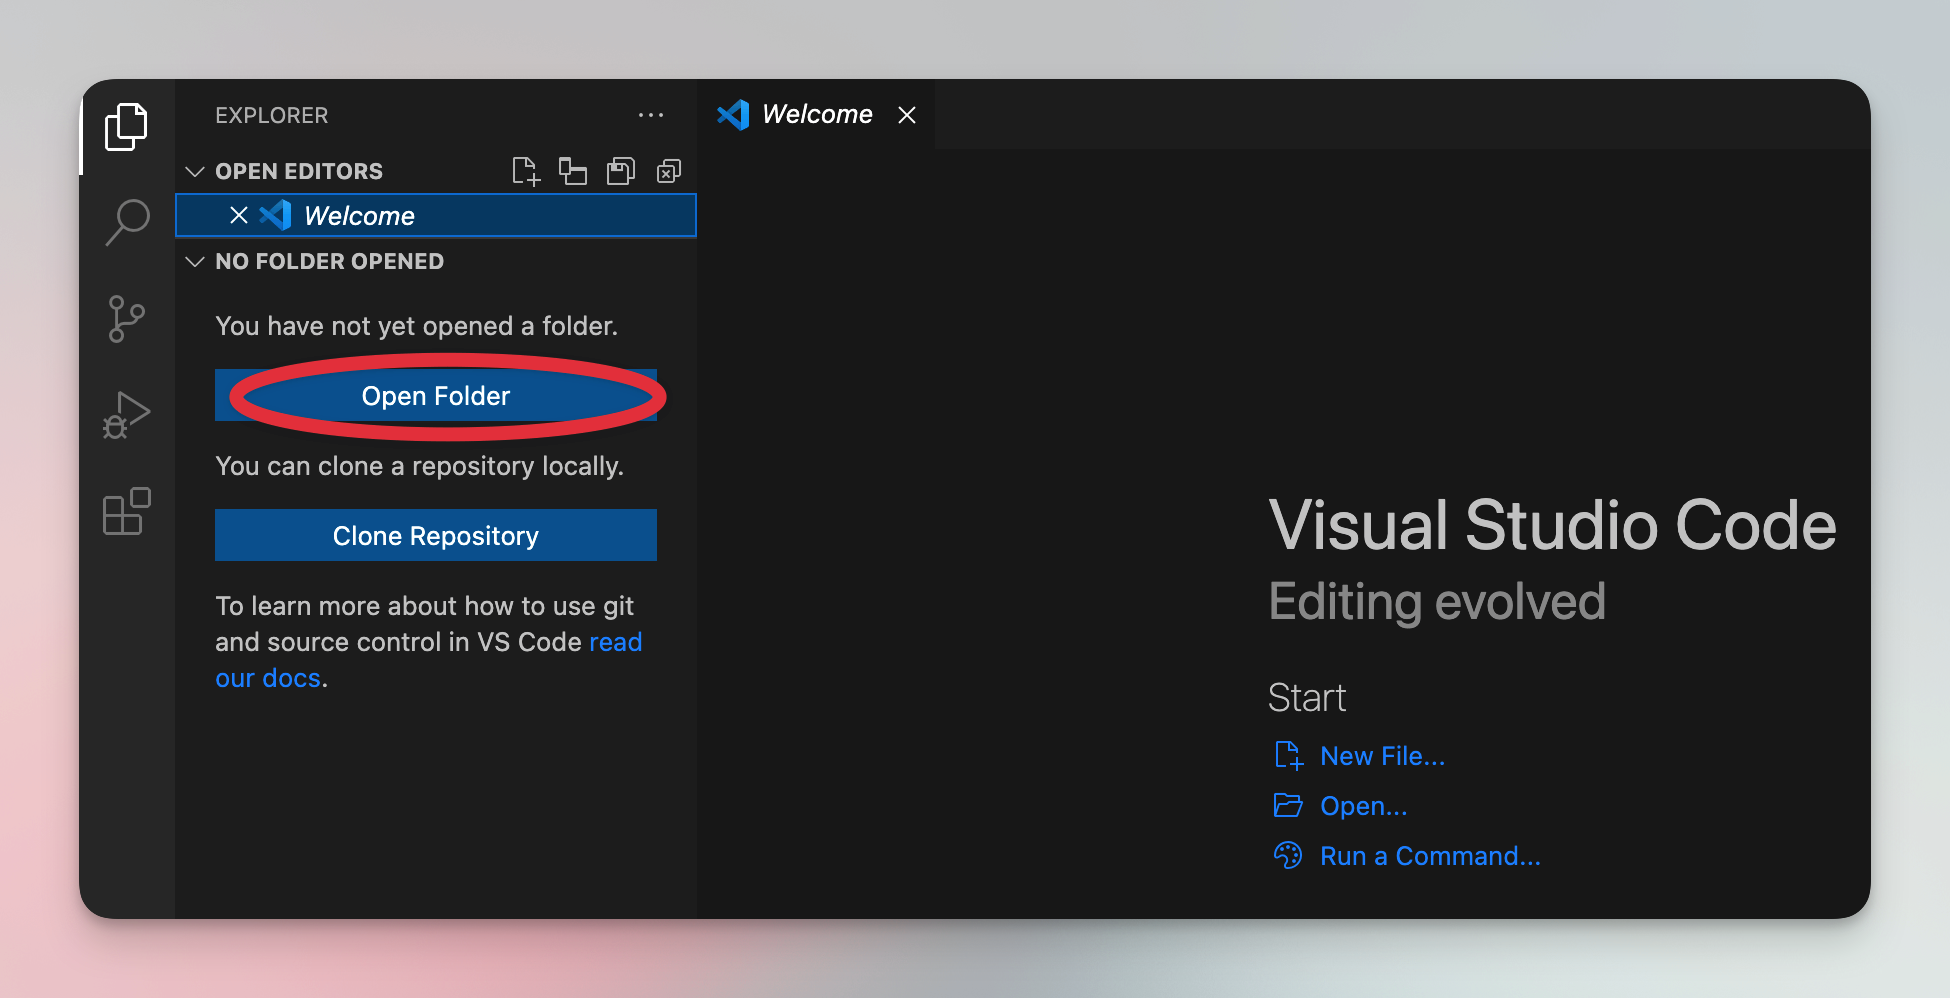 How to open a folder in VSCode